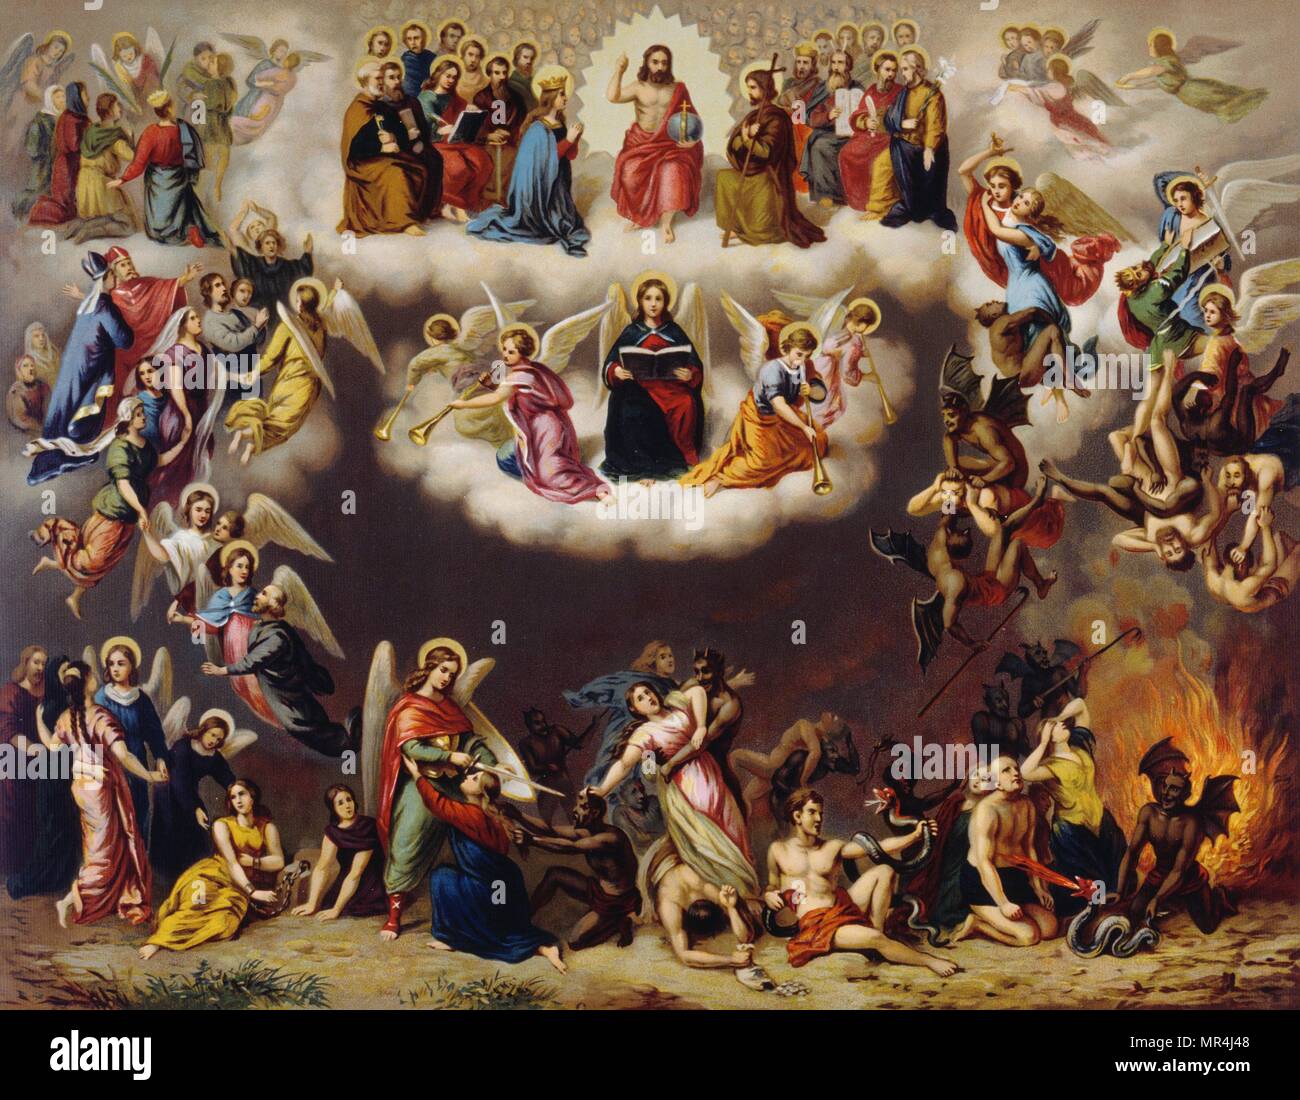 Chromolithograph depicting the Last Judgement 1900. It represents the Christian perception of the final and eternal judgment by God of the people in every nation[1] resulting in the glorification of some and the punishment of others. Stock Photo